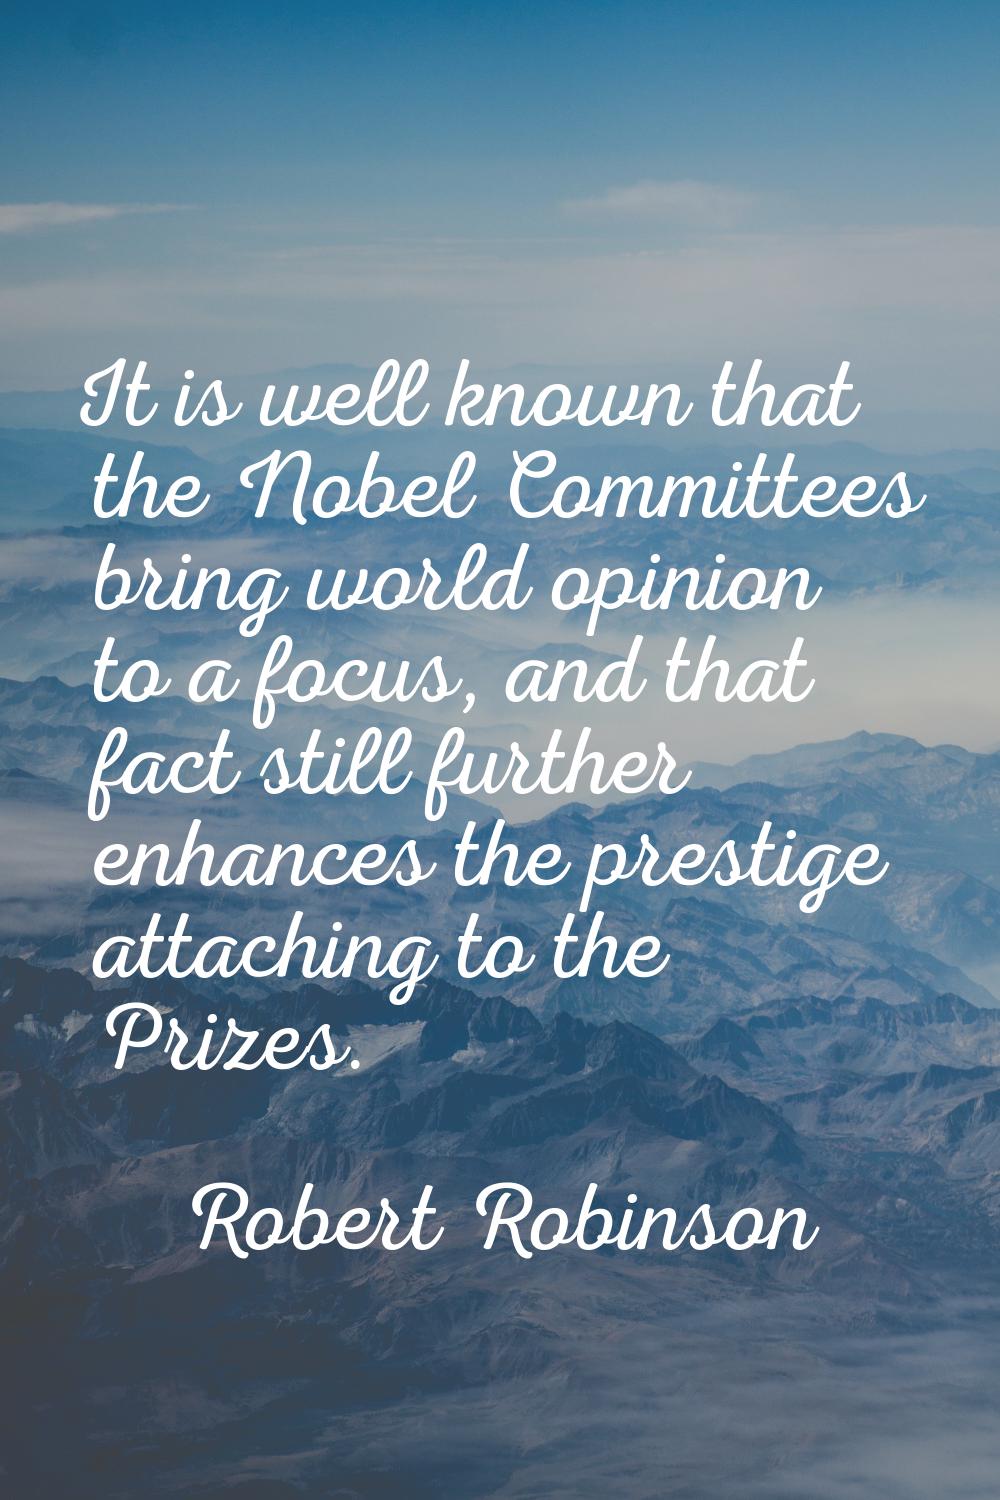 It is well known that the Nobel Committees bring world opinion to a focus, and that fact still furt